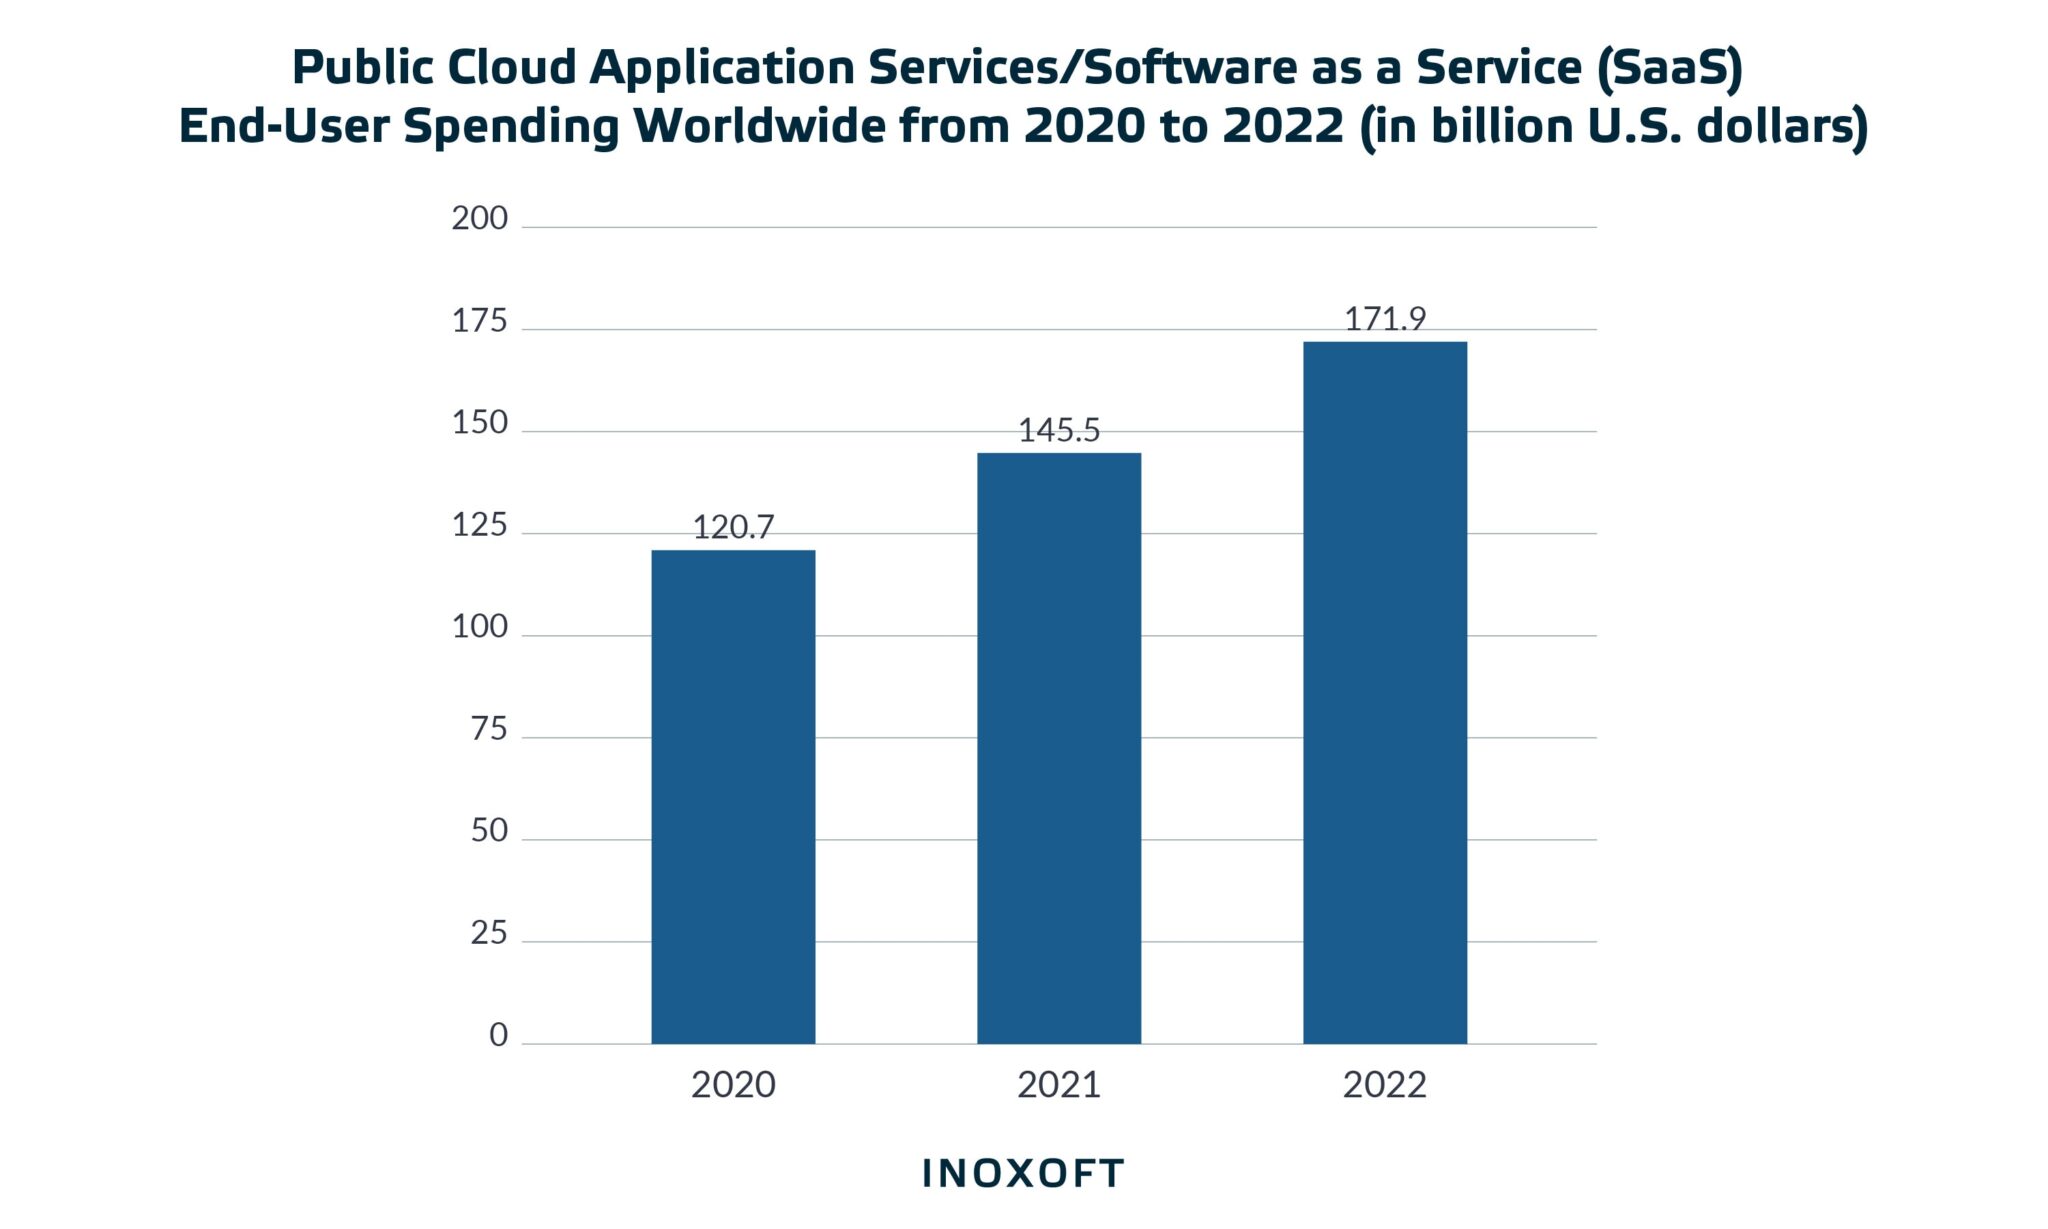 Bar chart of public cloud application services/software as a service (SaaS) end-user spending worldwide from 2020 to 2022 (in billion U.S. dollars)